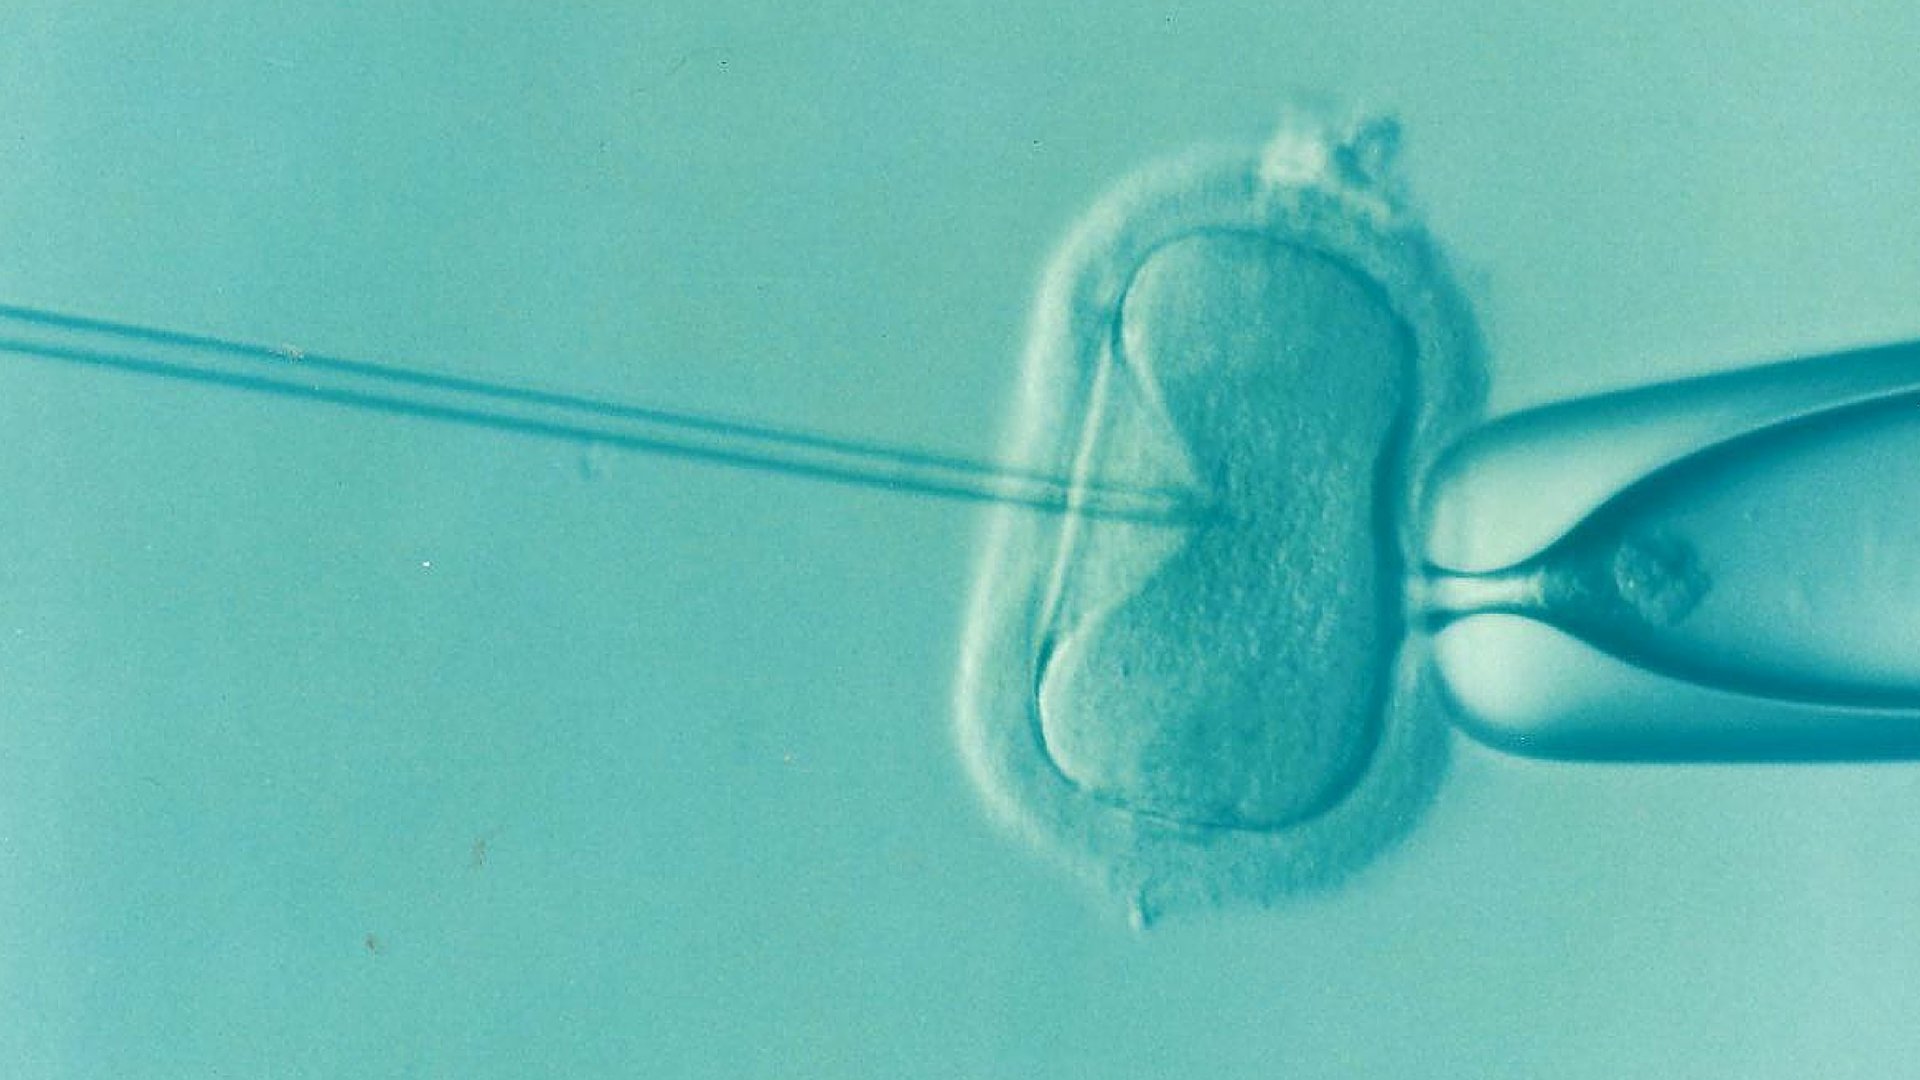 Home-monitoring during IVF found to work just as well as hospital checks